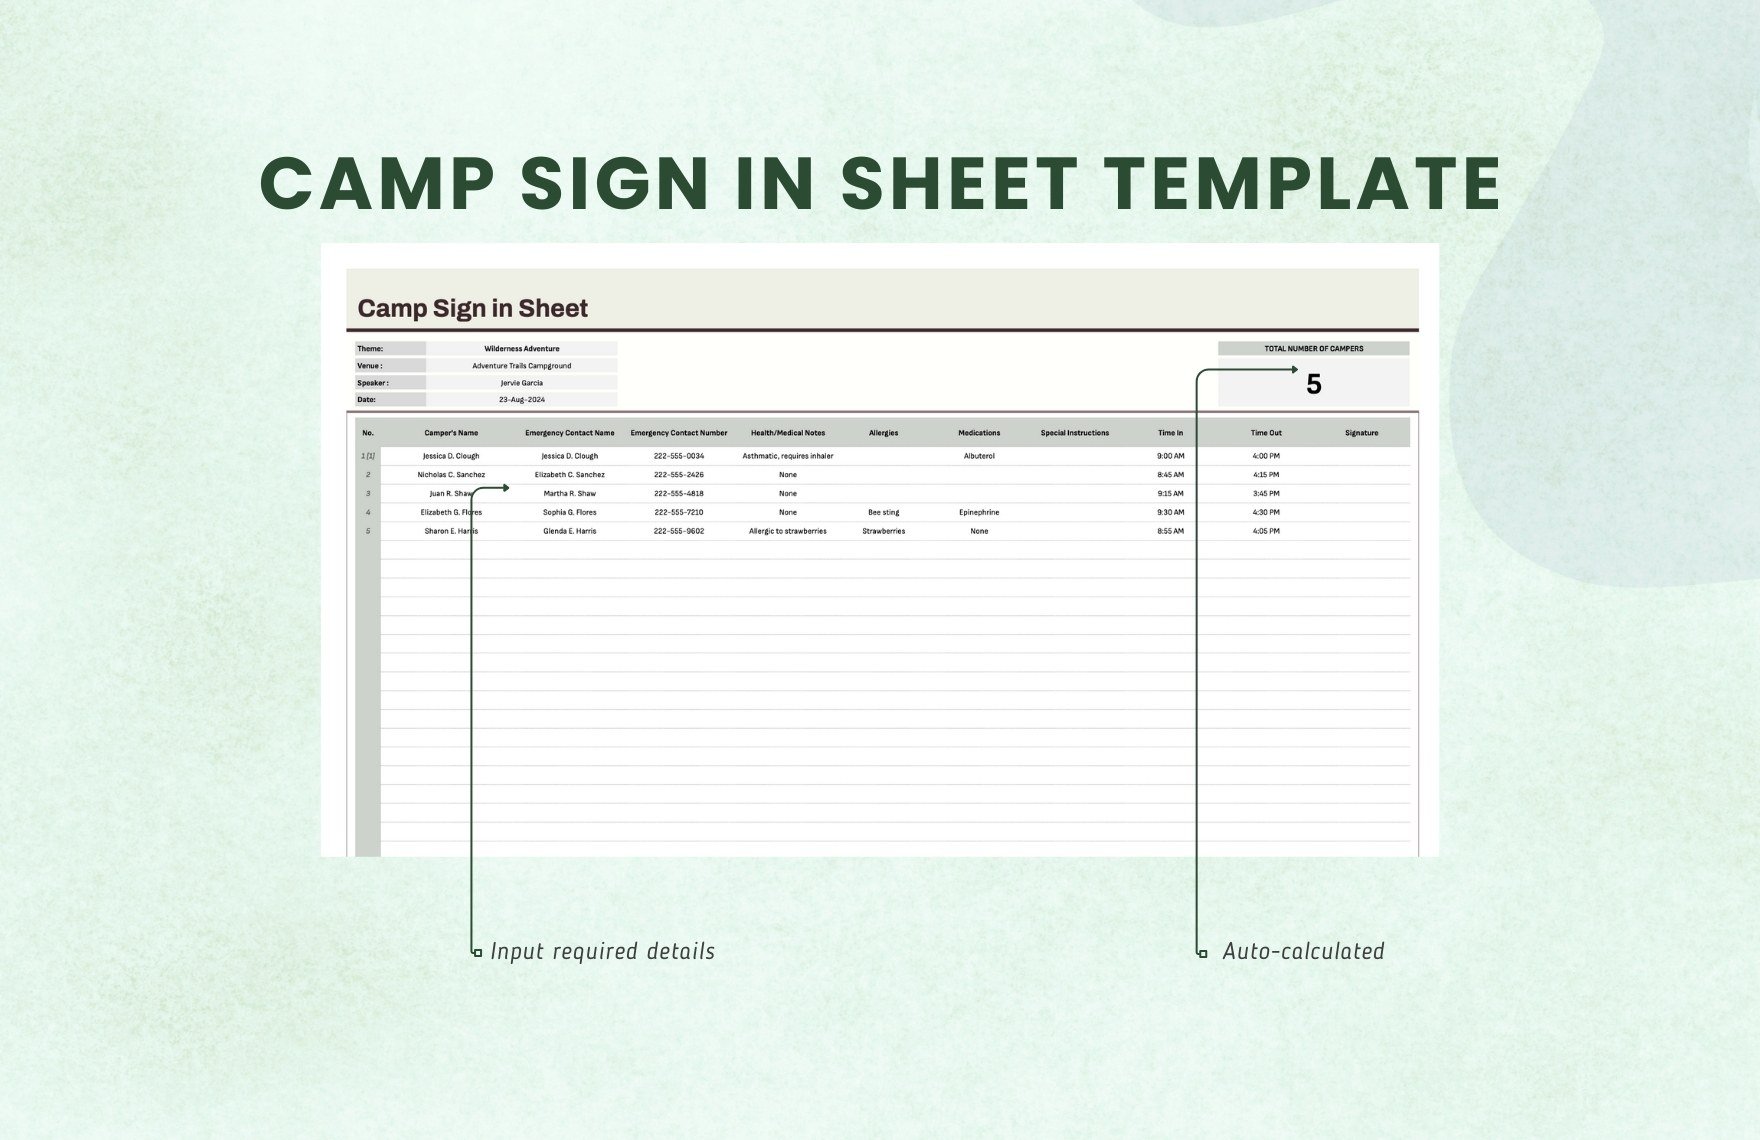 Camp Sign in Sheet Template